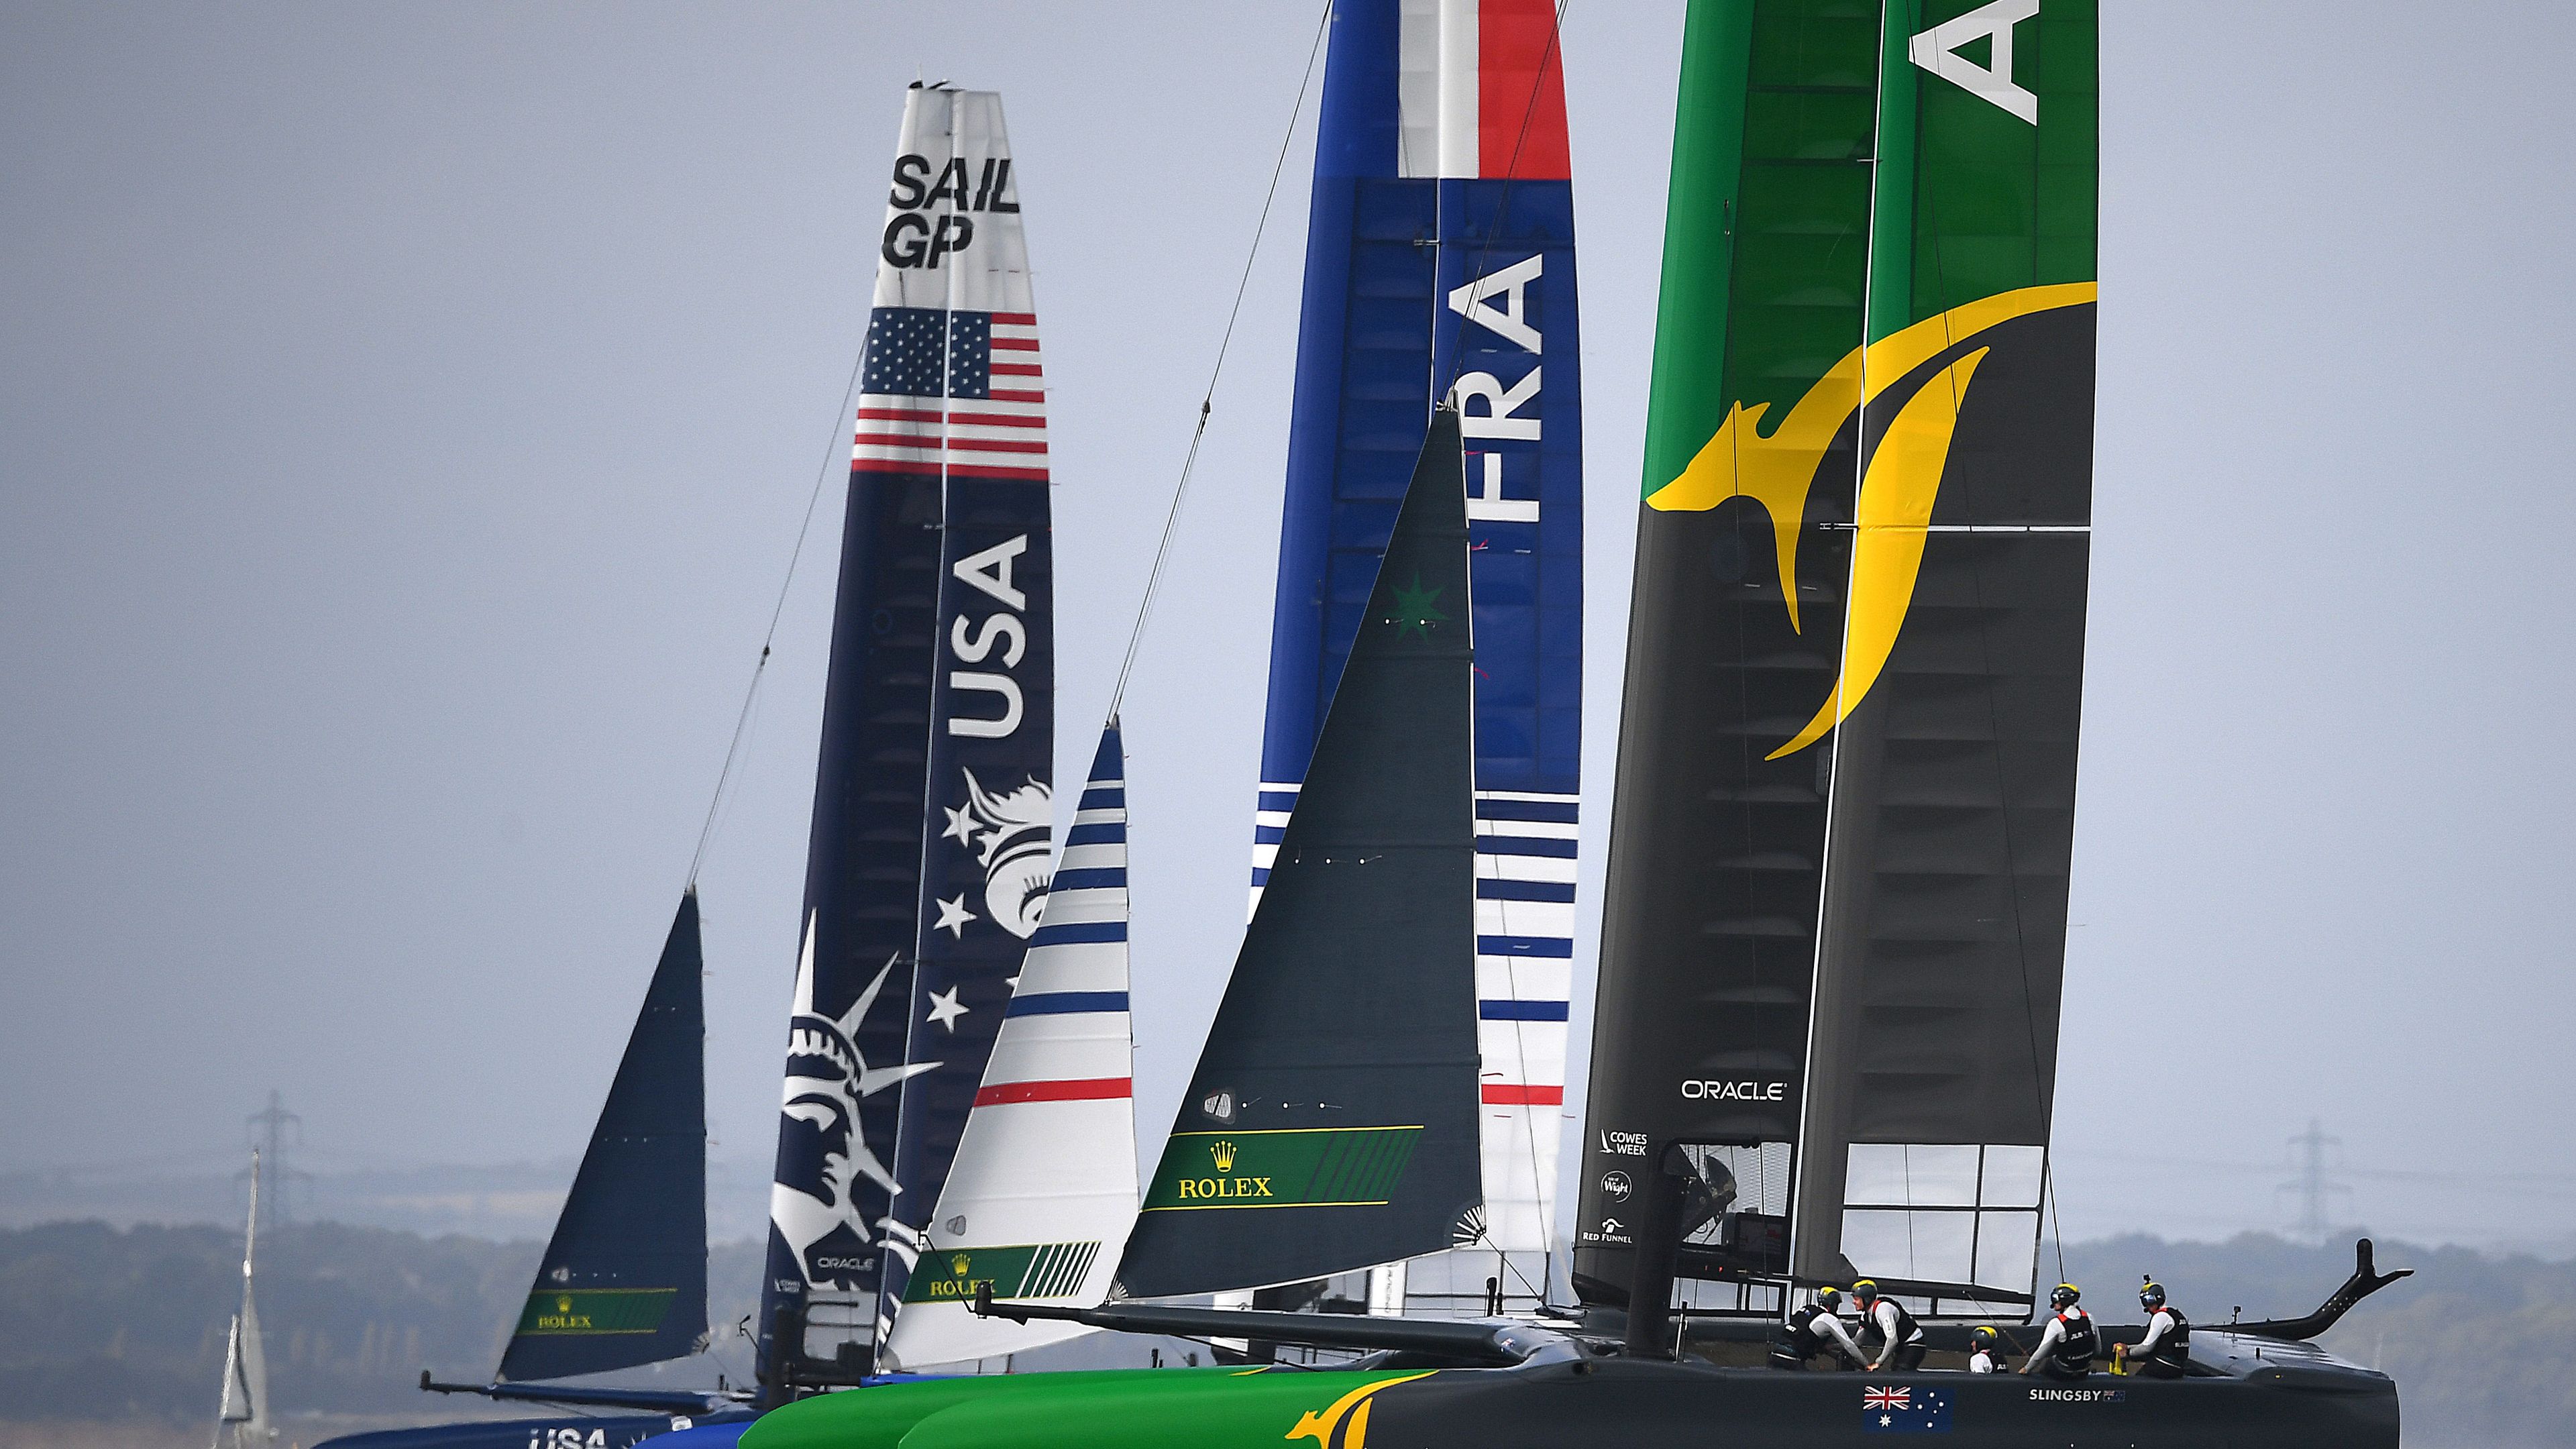 Sydney Harbour to stage first round of 2020 SailGP